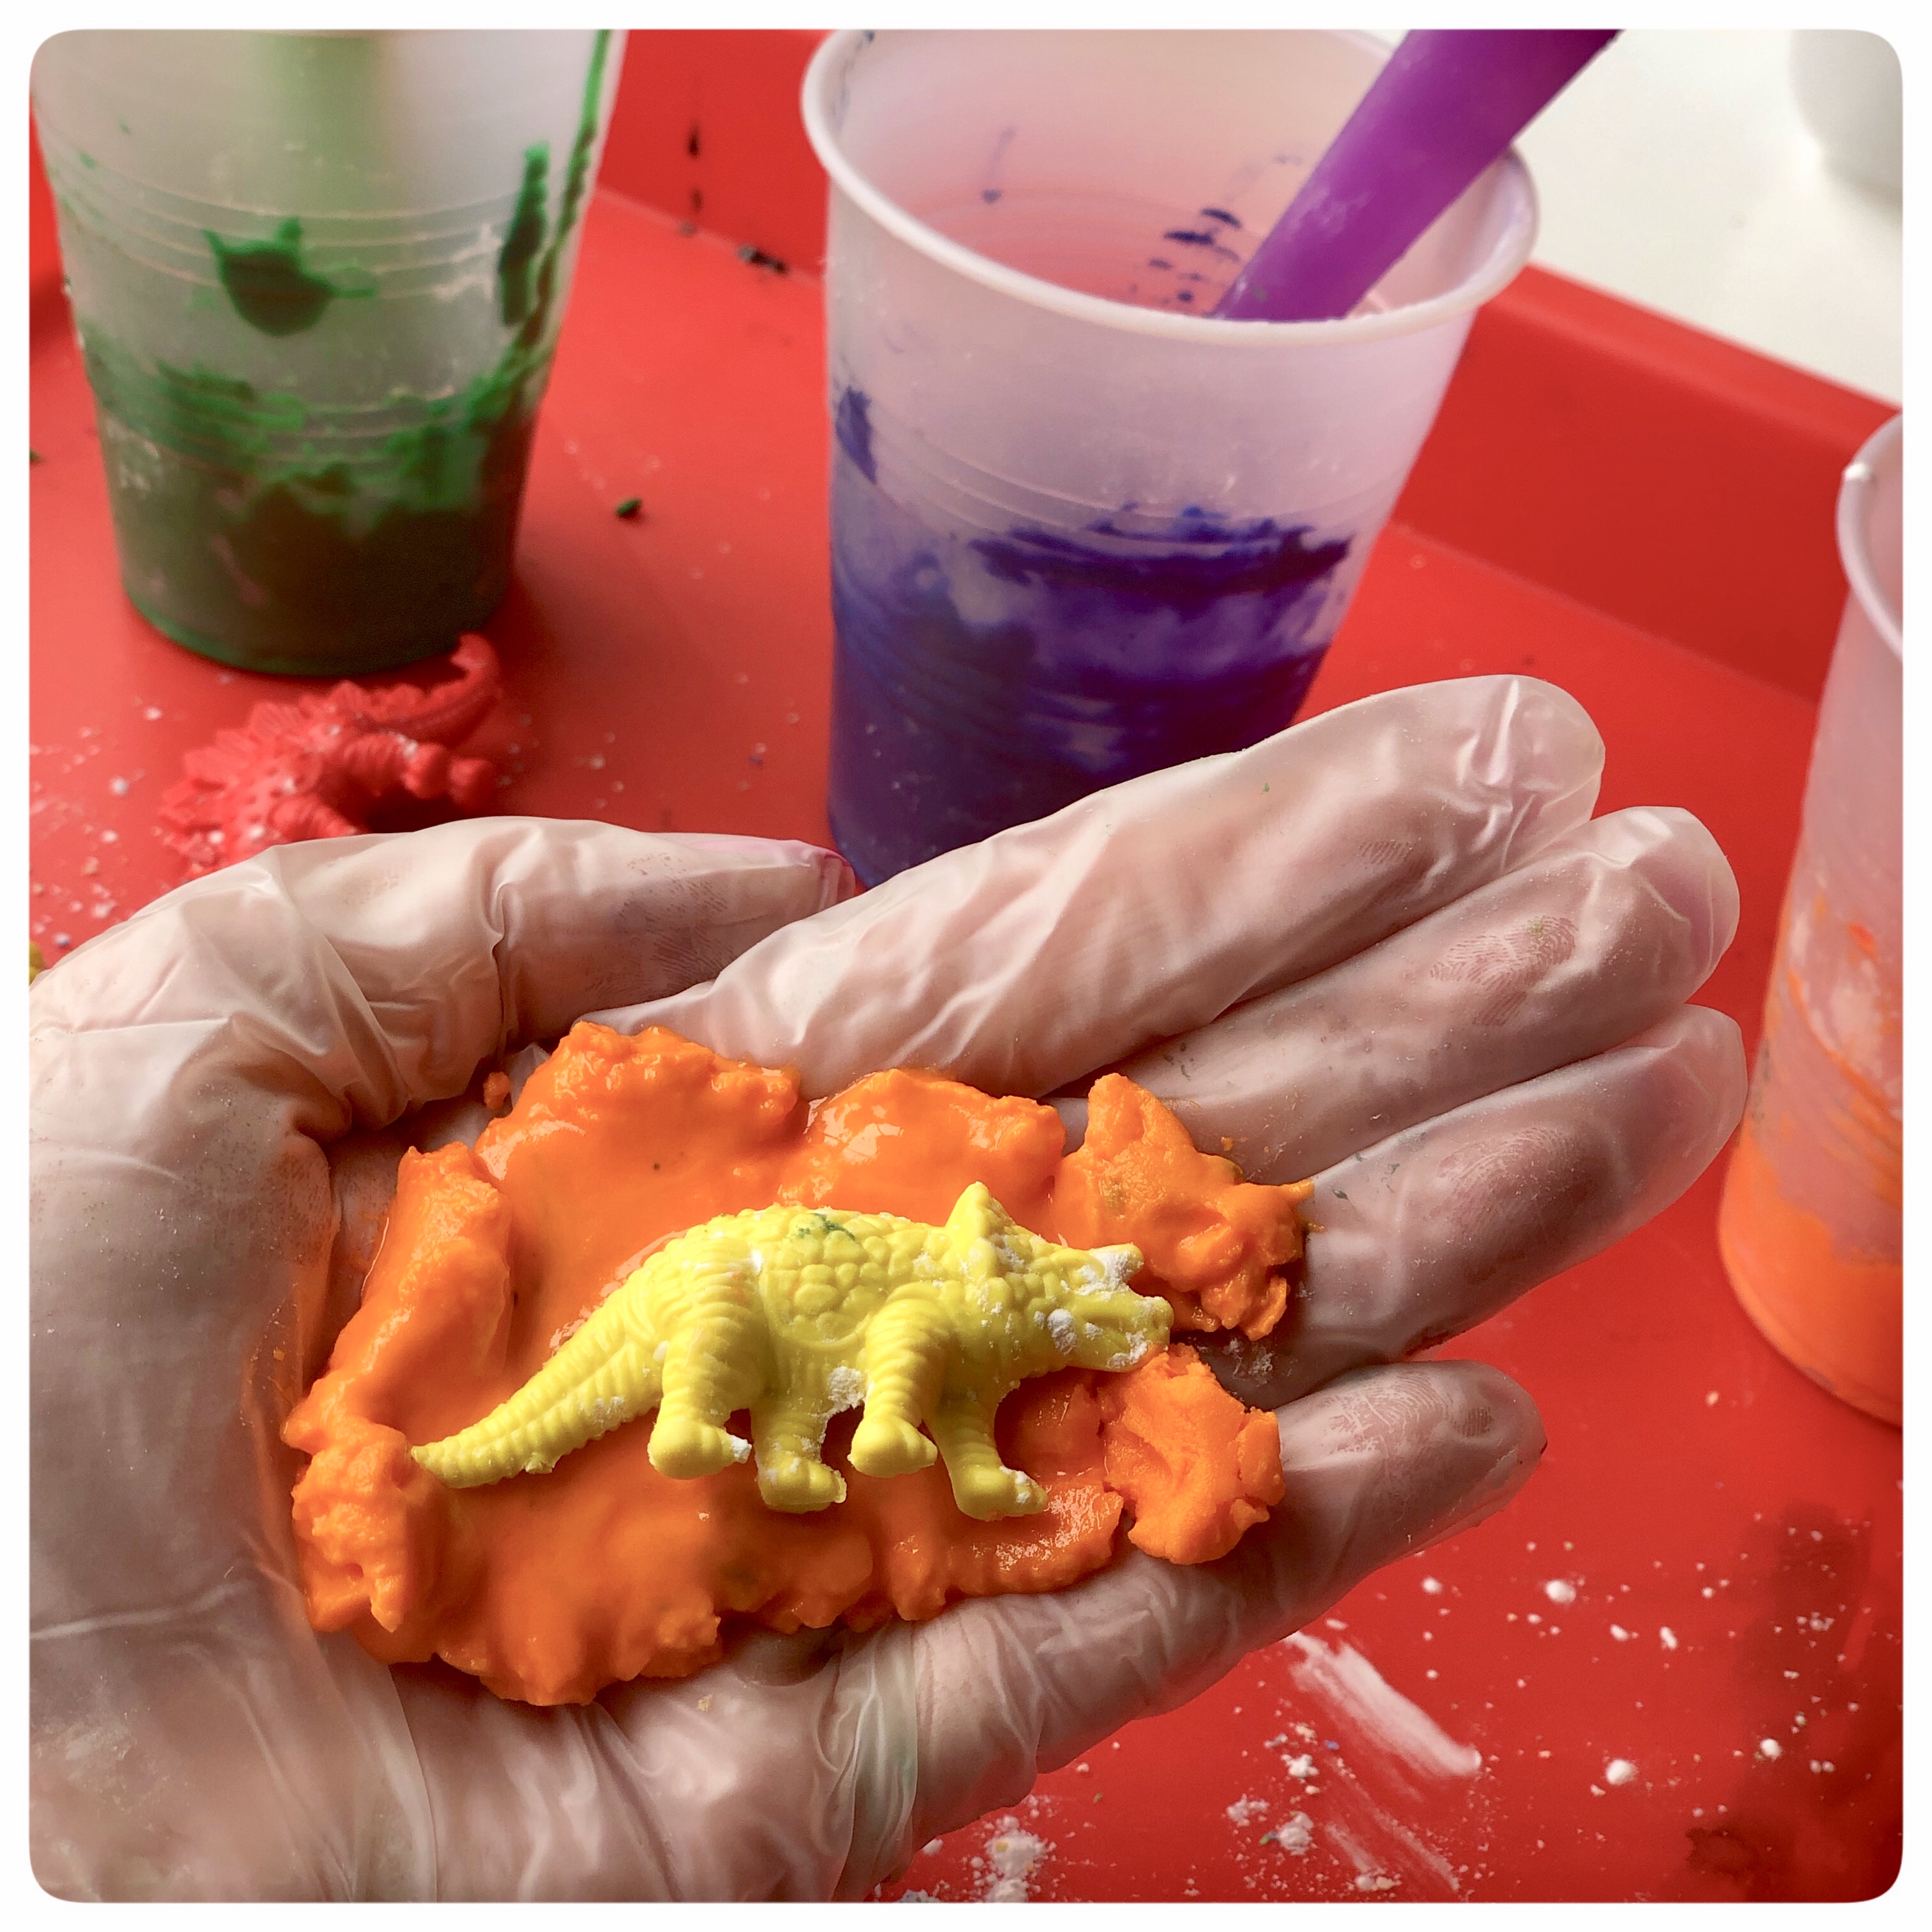 This is a fun hands-on activity that teaches kids about the chemical reaction between baking soda and vinegar while also incorporating Dinosaurs.